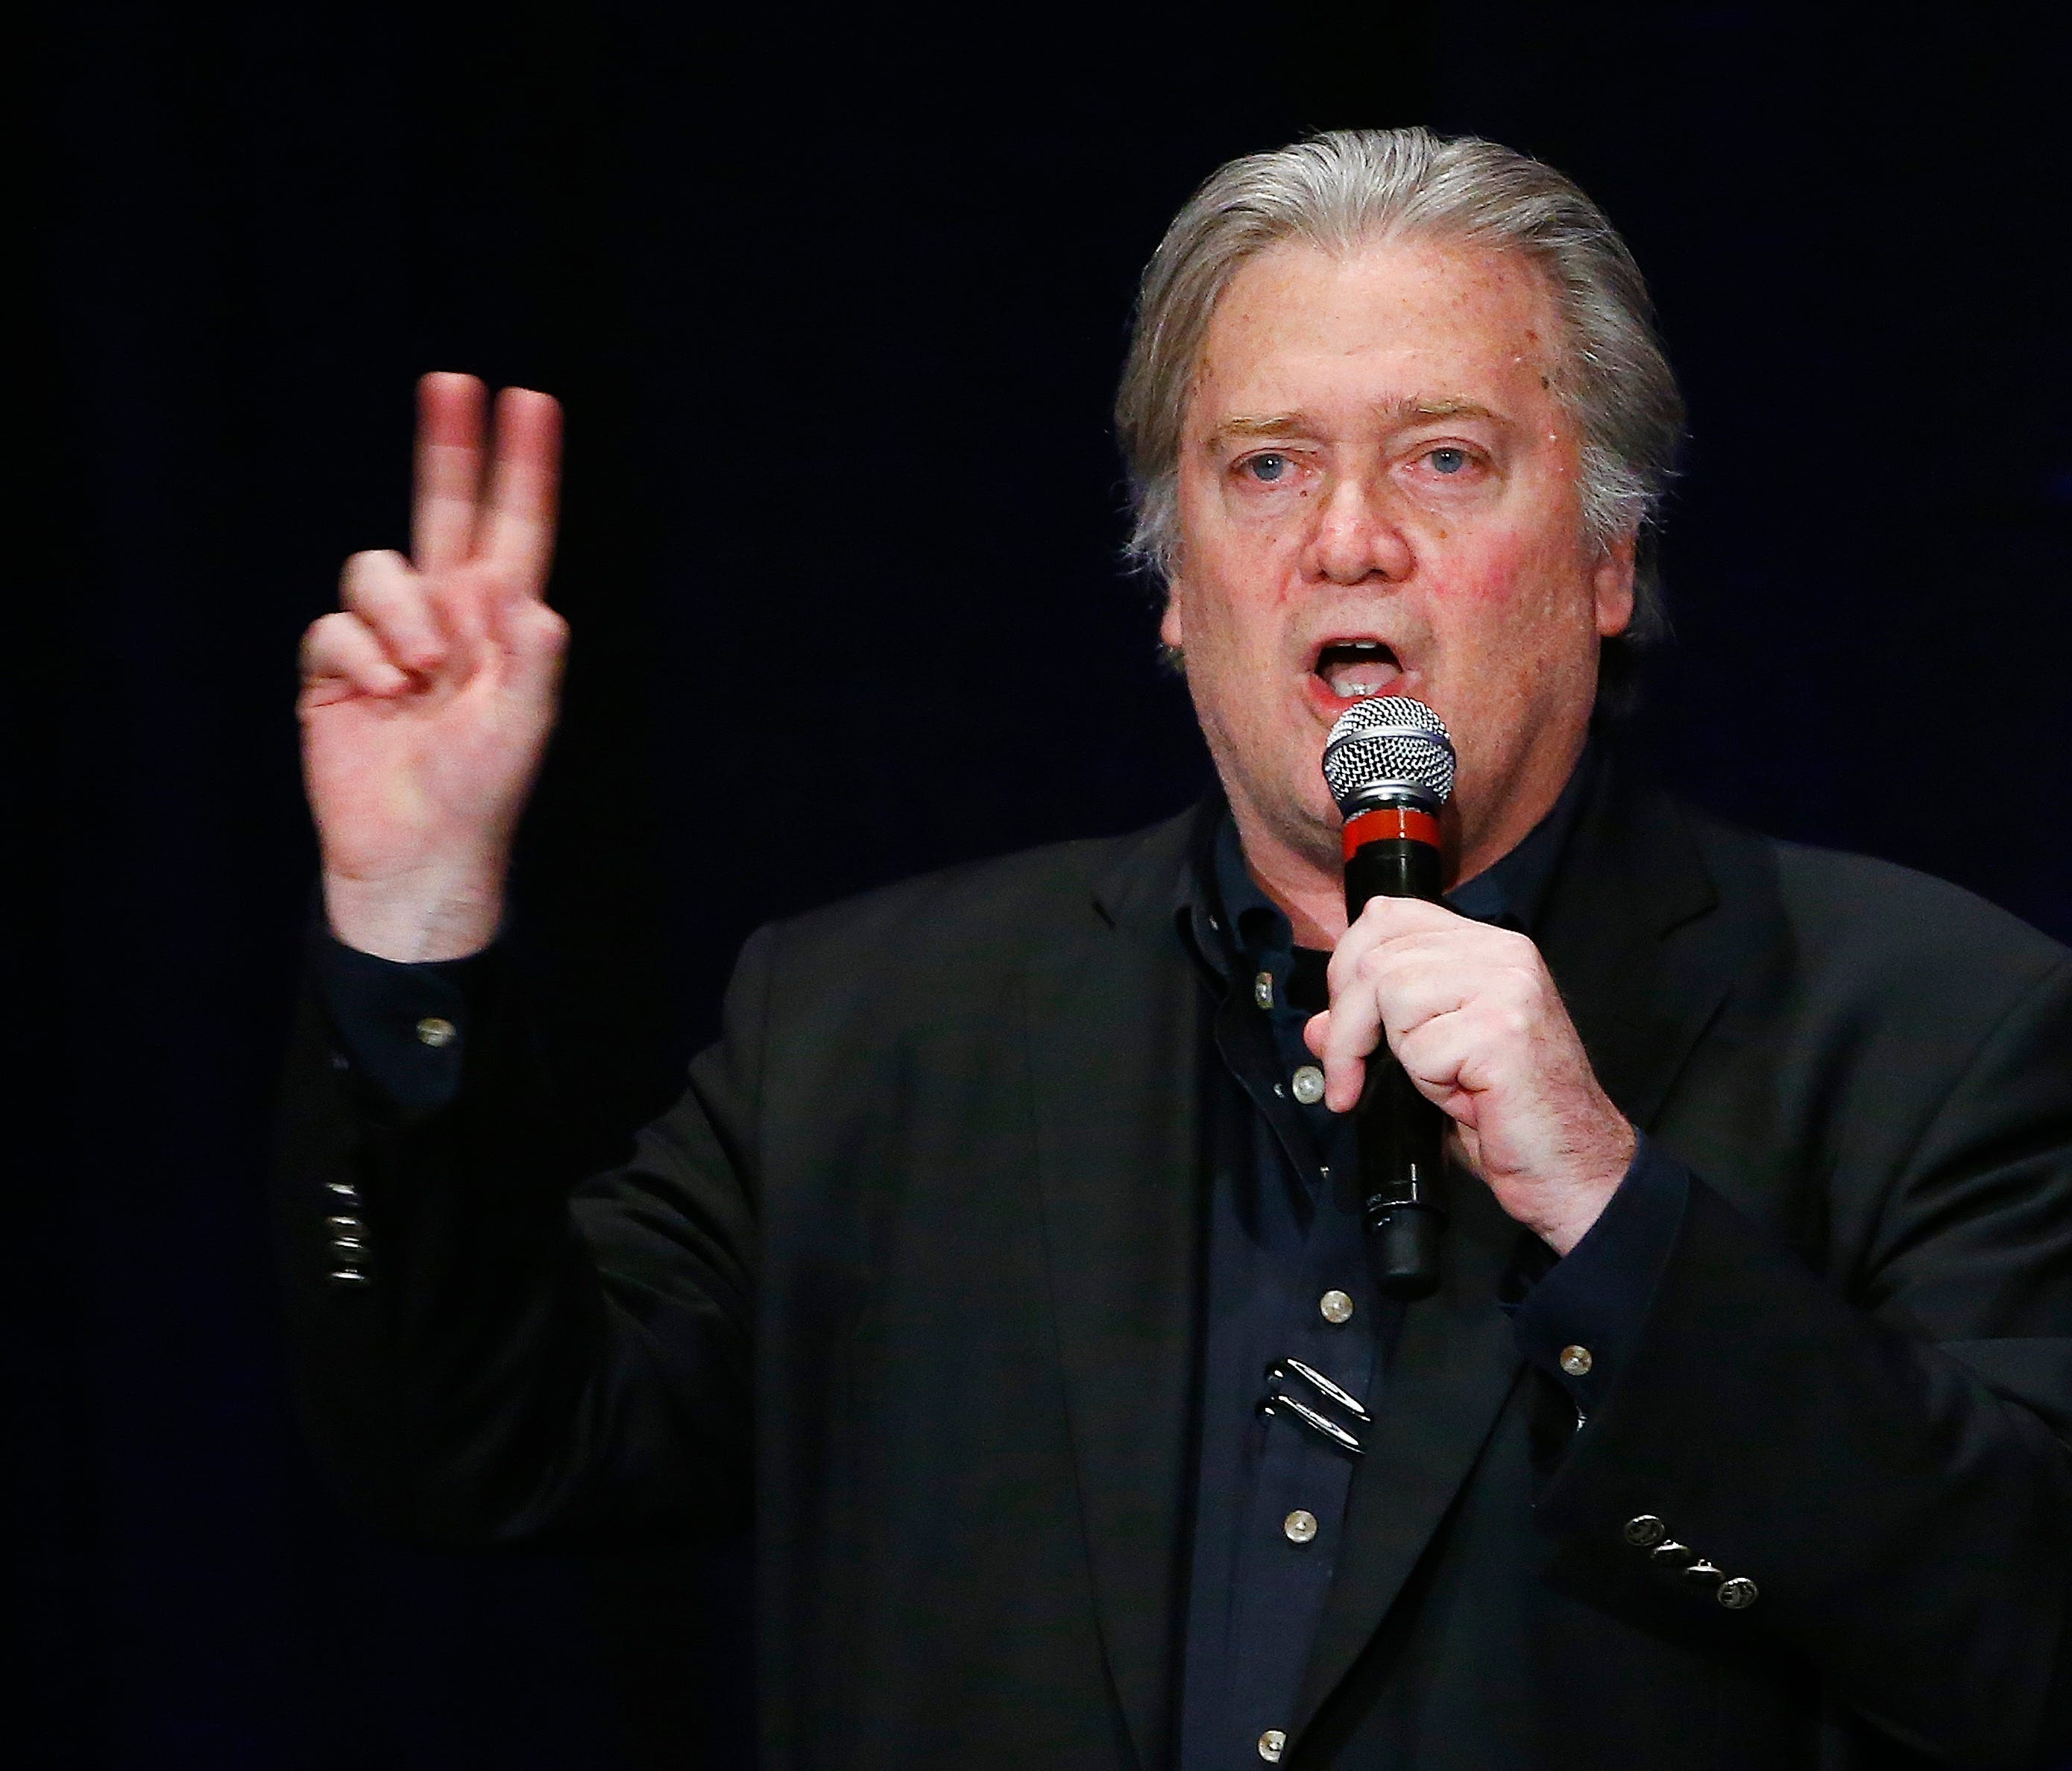 In this Oct. 17, 2017, file photo Steve Bannon, former strategist for President Donald Trump, speaks at a campaign rally in Arizona.